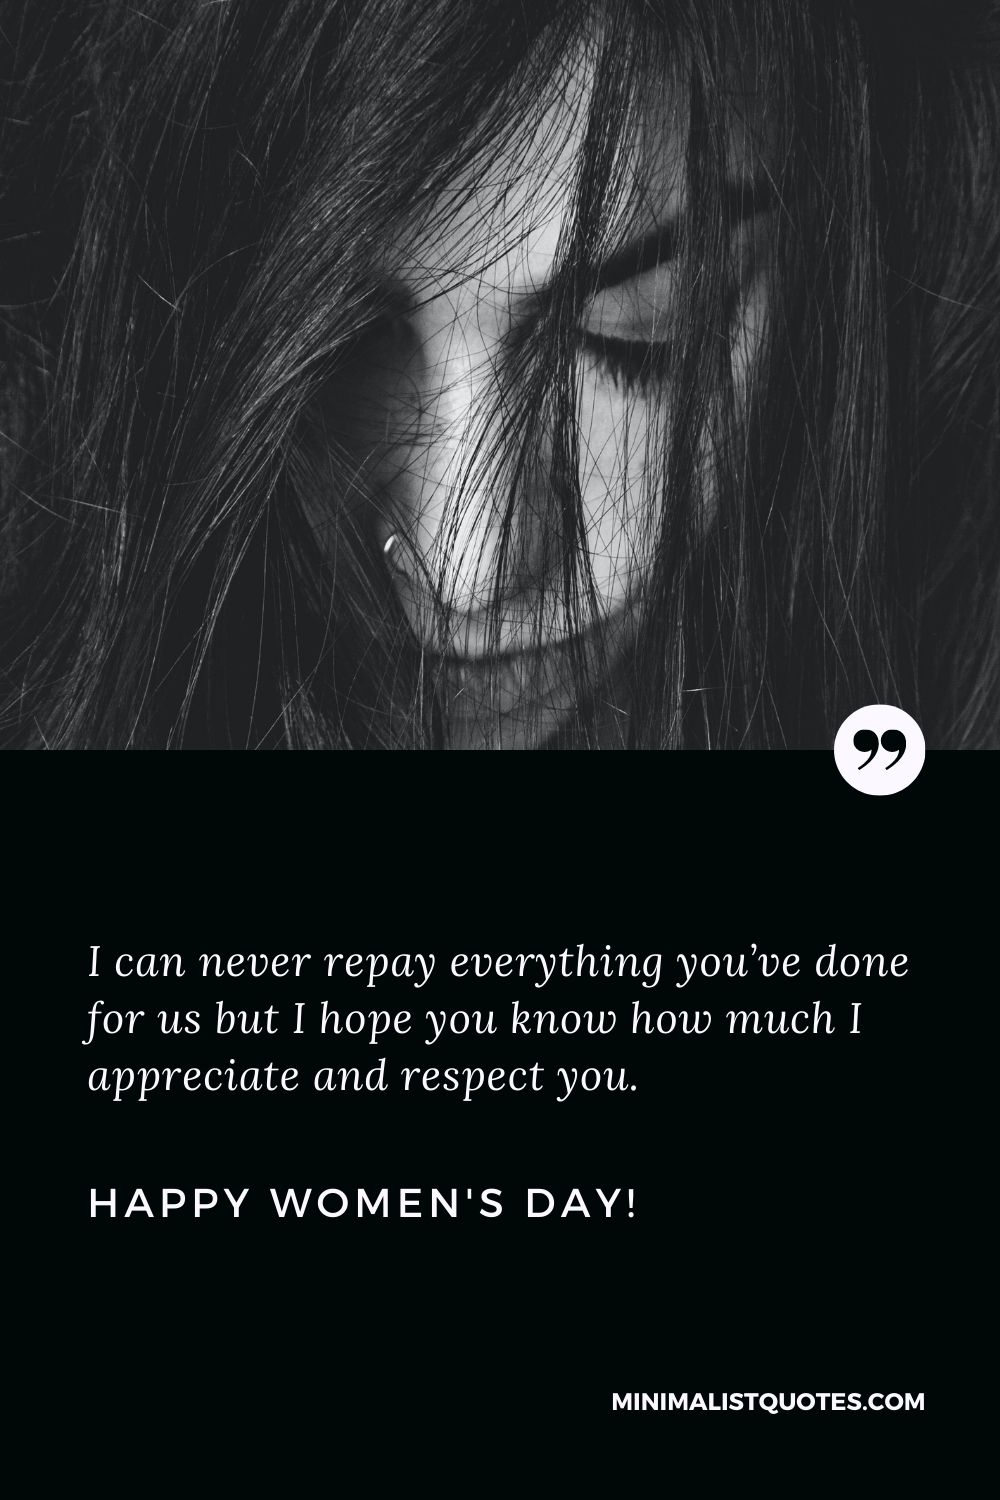 Women's day wishes for teacher: I can never repay everything you’ve done for us but I hope you know how much I appreciate and respect you. Happy Womens Day!